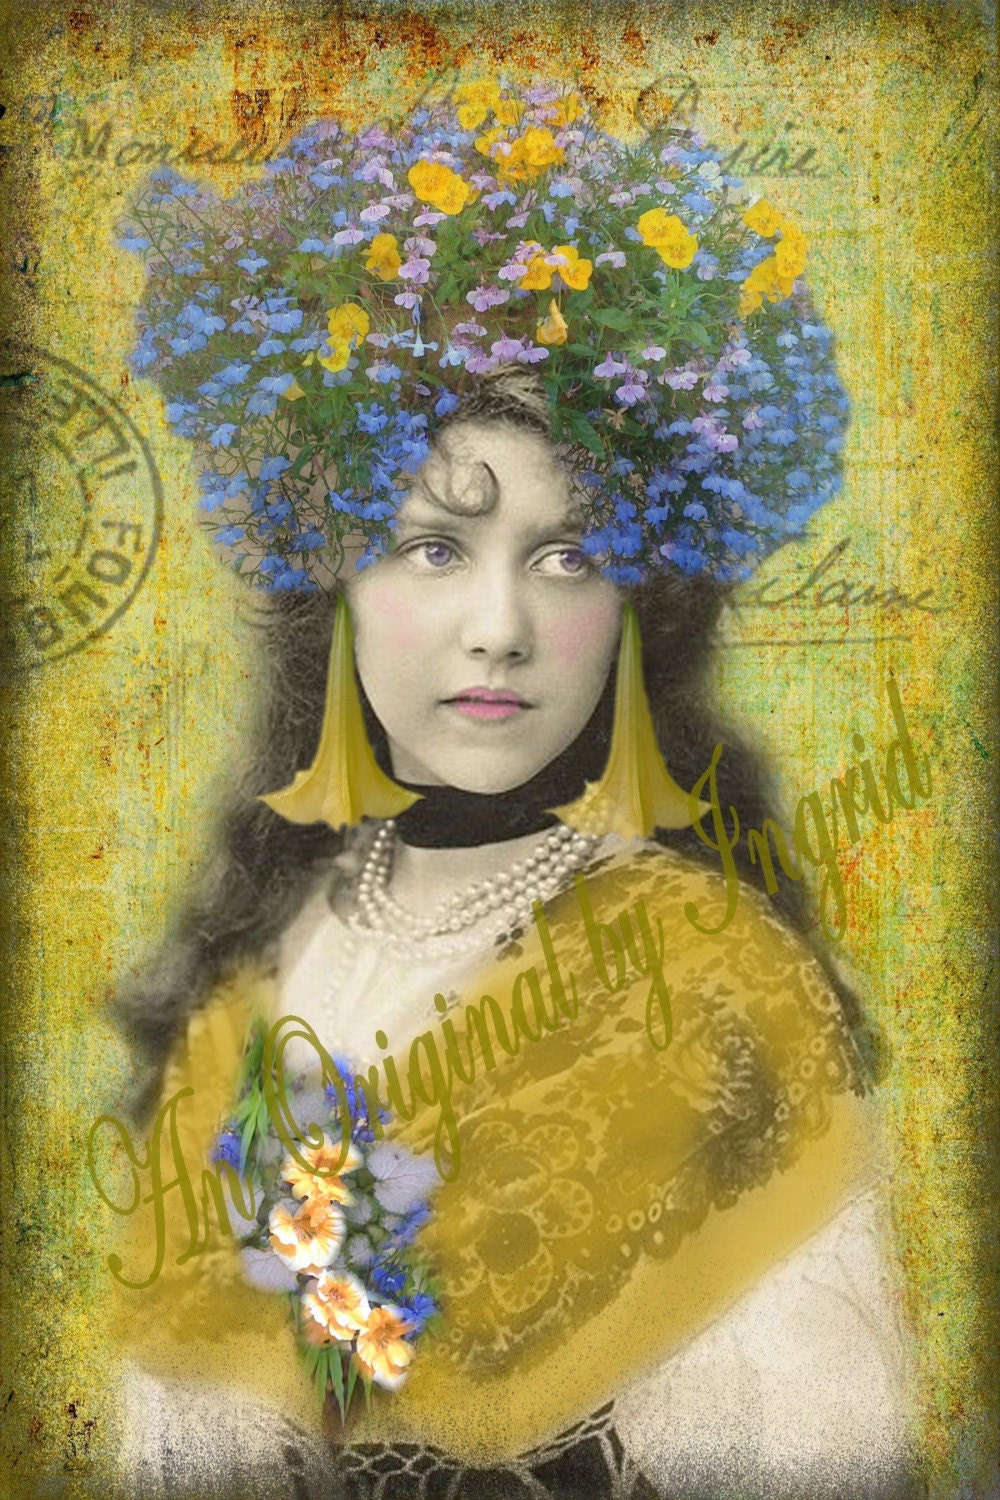 Springtime Lady Digital Collage Greeting Card  (Featured in the 2010 Fall Issue of Somerset Digital Studio)(Suitable for Framing)